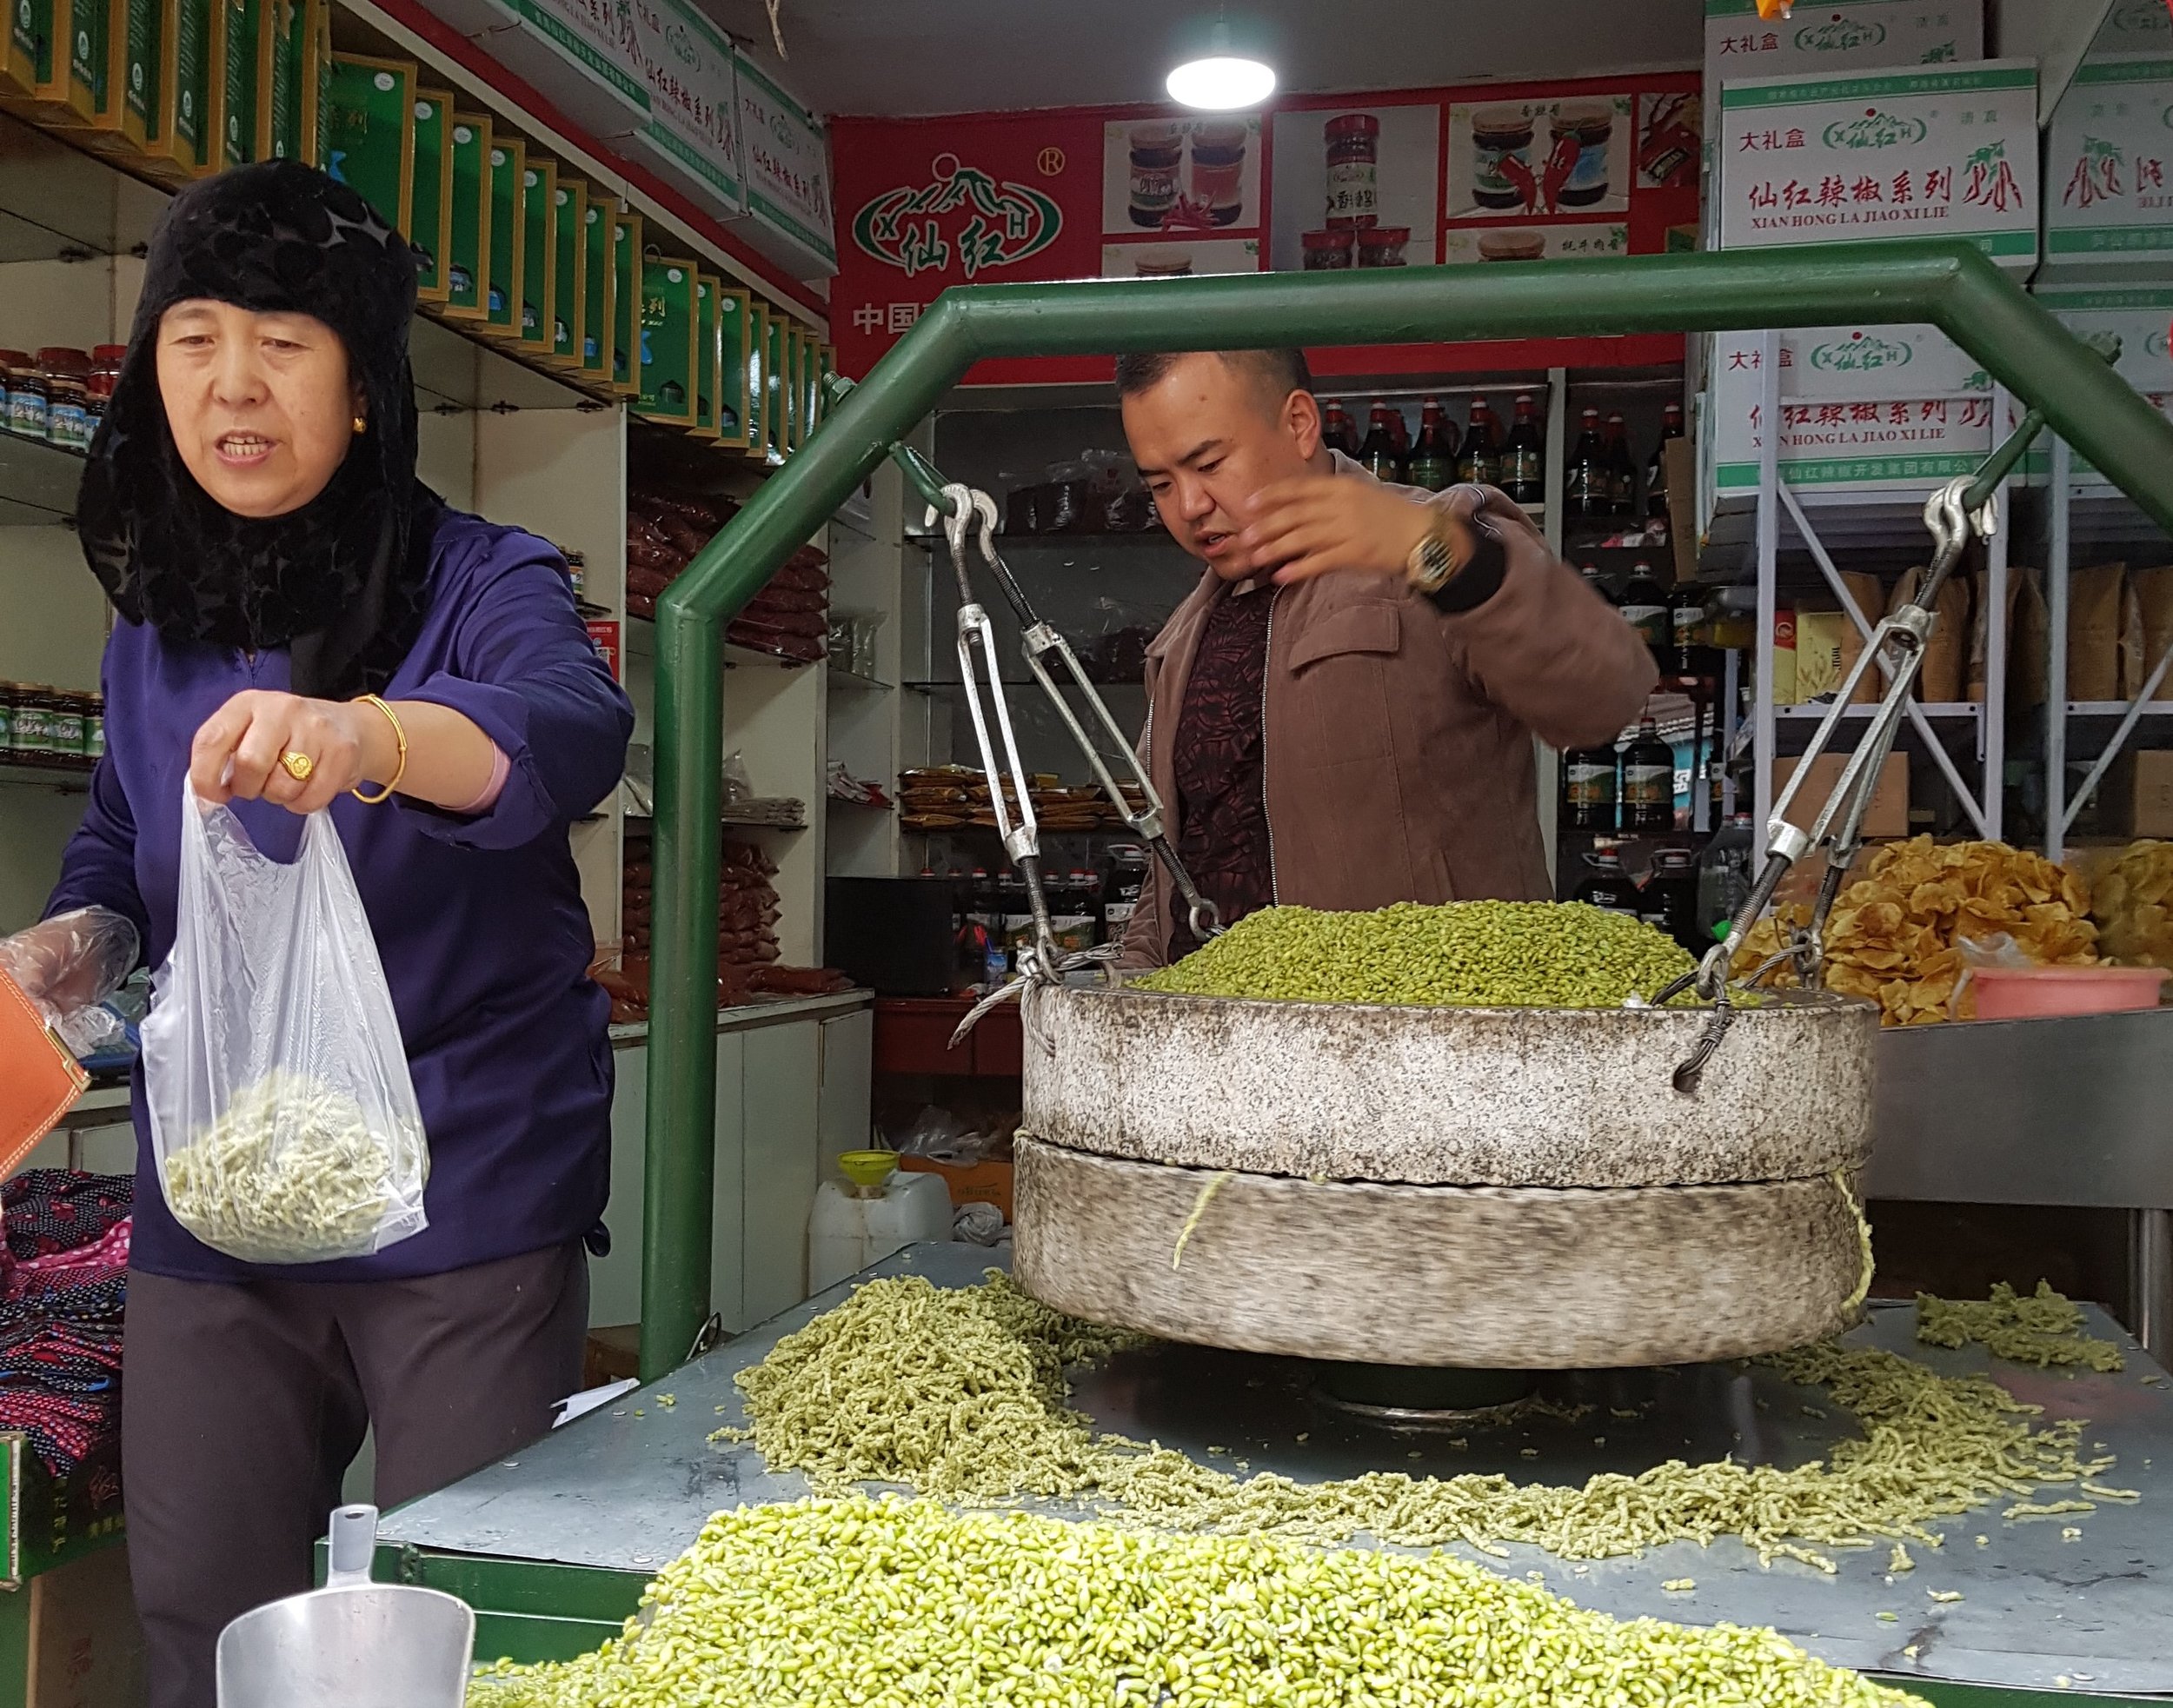 Selling grains in Xining - note typical black scarf of Hui woman